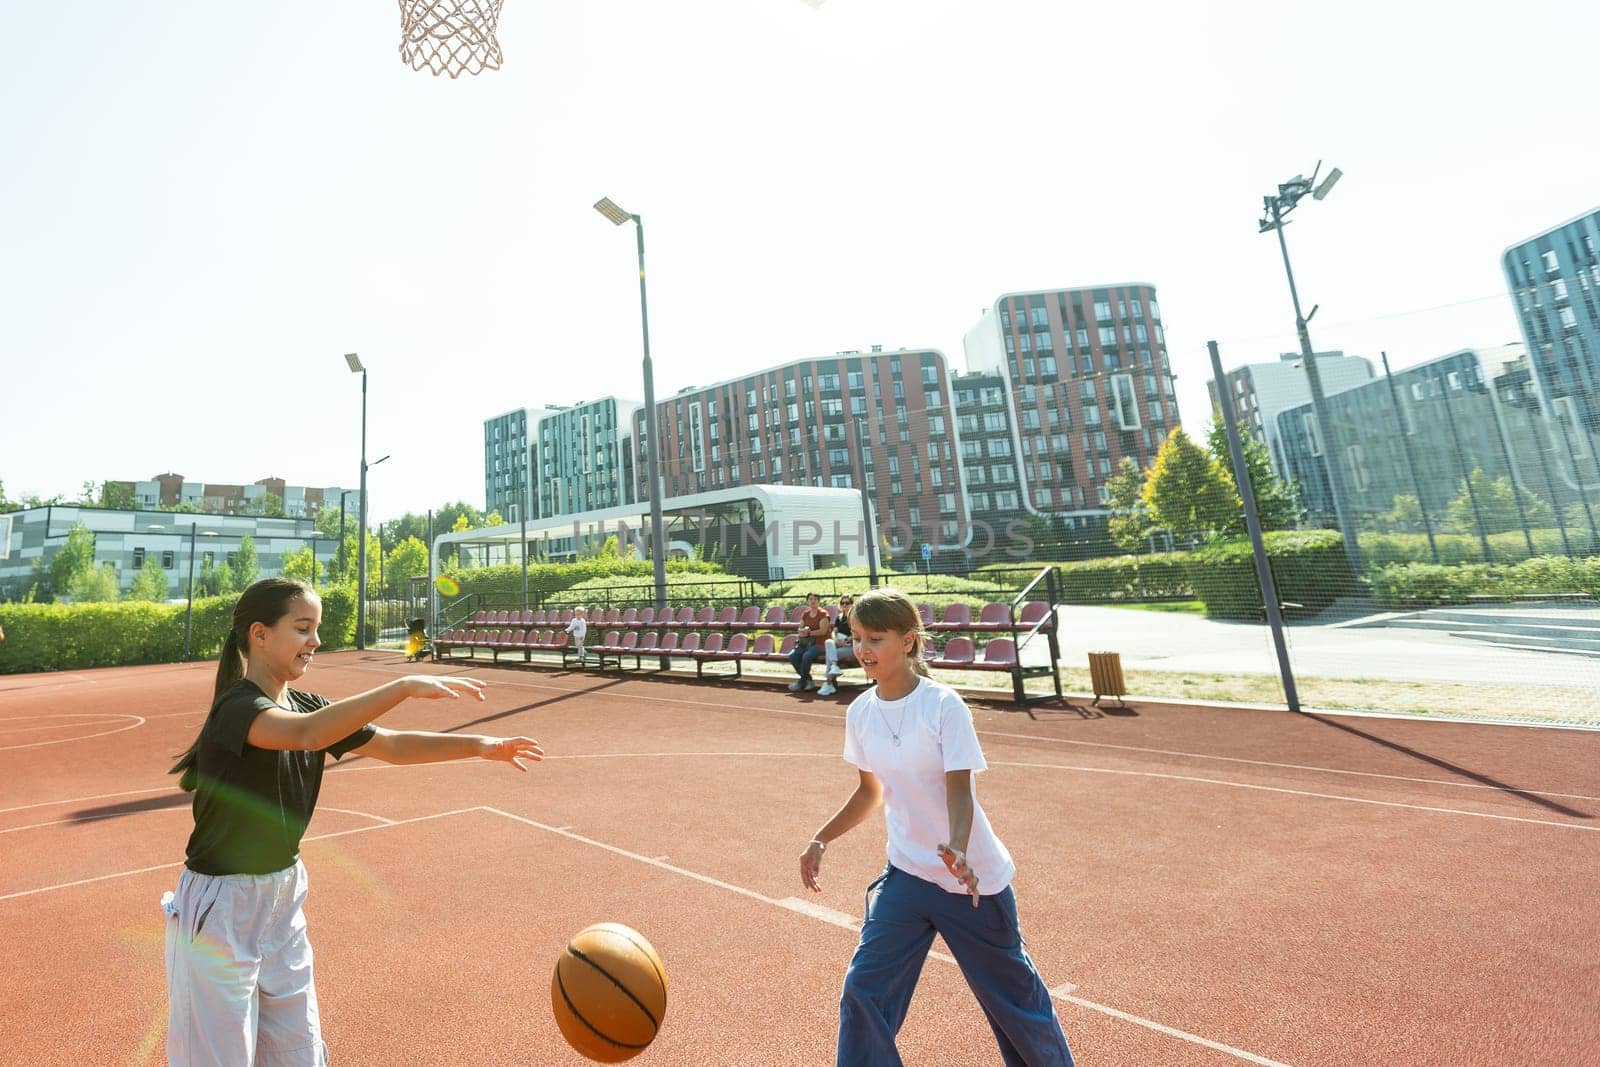 Teenager girl street basketball player with ball on outdoor city basketball court. by Andelov13